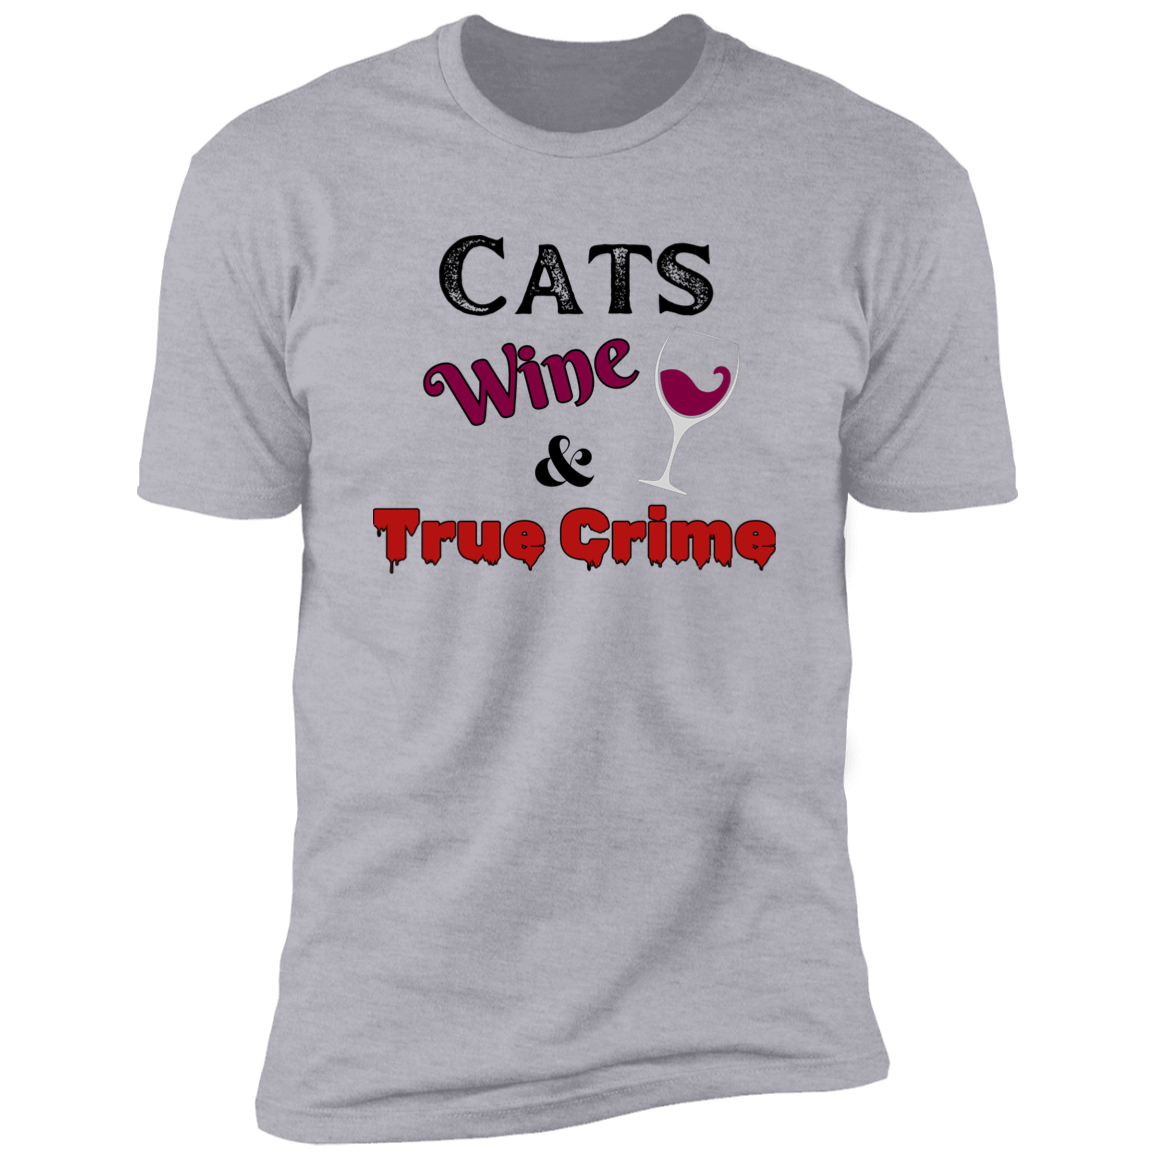 Cats Wine & True Crime T-shirt, Cat shirt for humans, funny cat shirt, in light heather gray